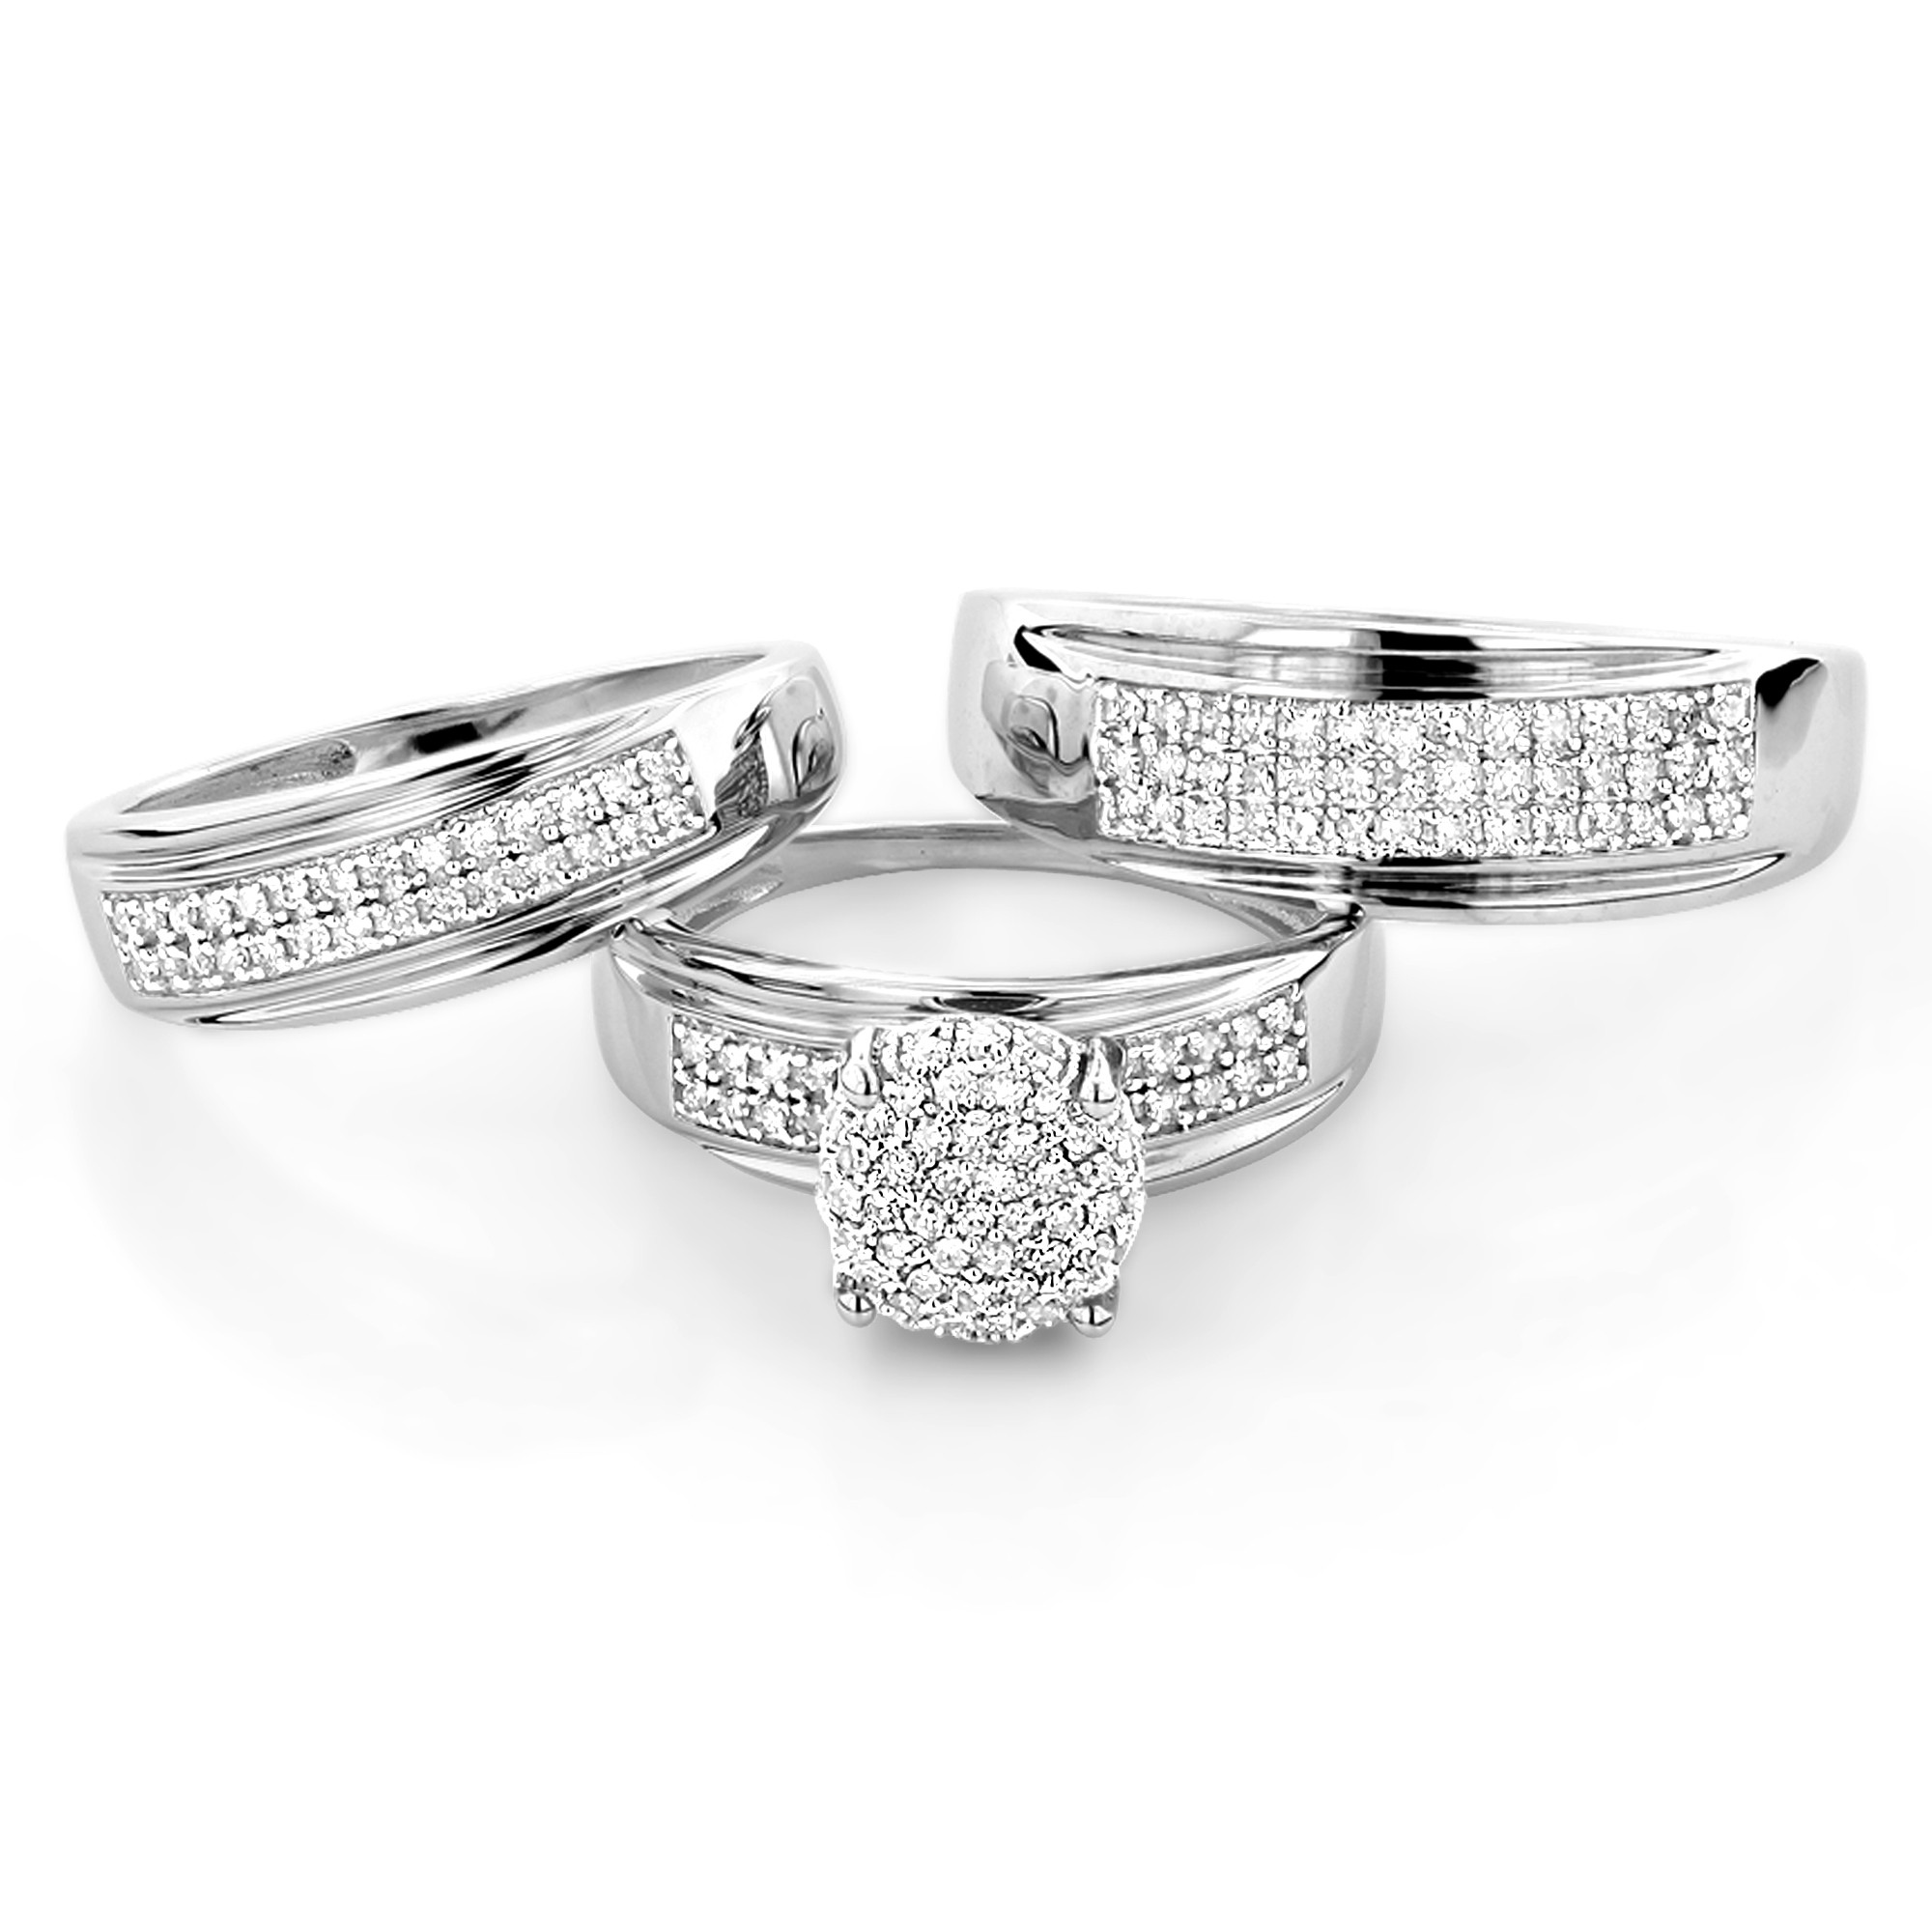 Wedding Rings His And Hers Sets
 10K Gold Engagement Trio Diamond His and Hers Wedding Ring